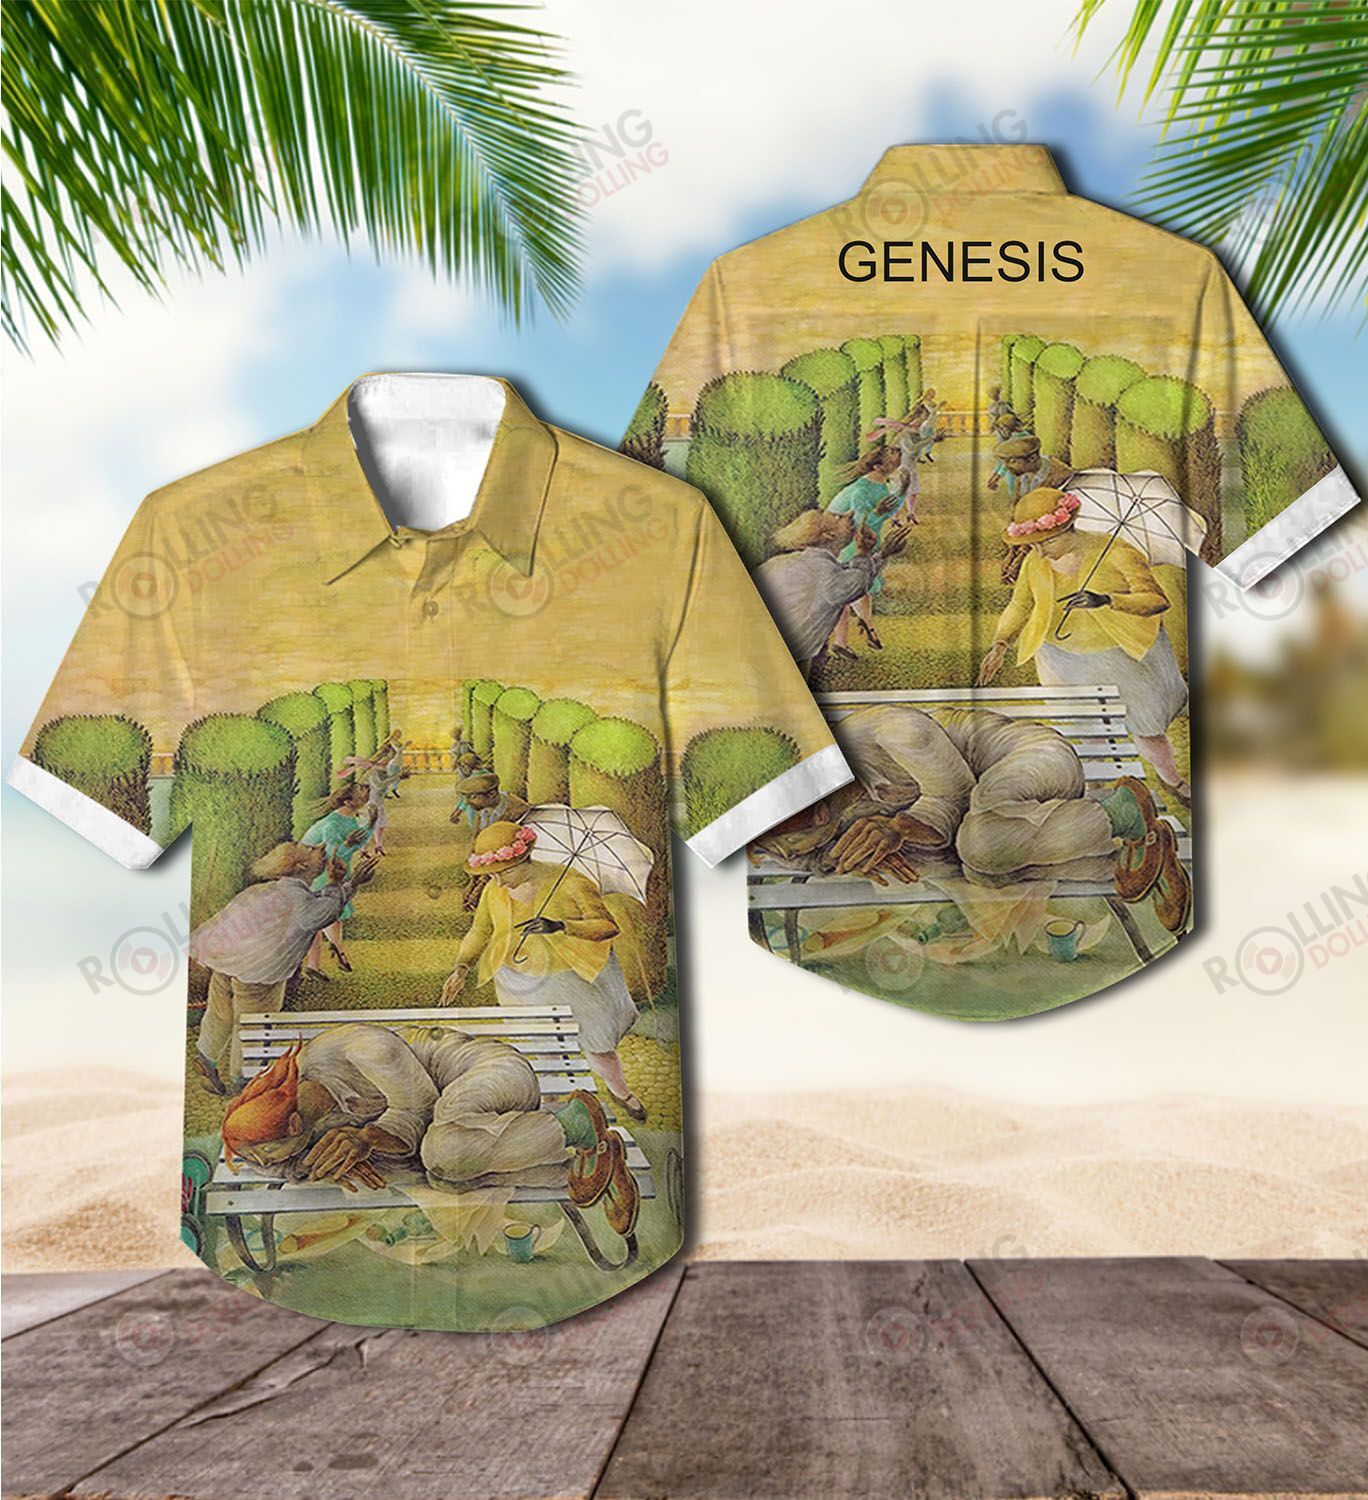 For summer, consider wearing This Amazing Hawaiian Shirt shirt in our store 197